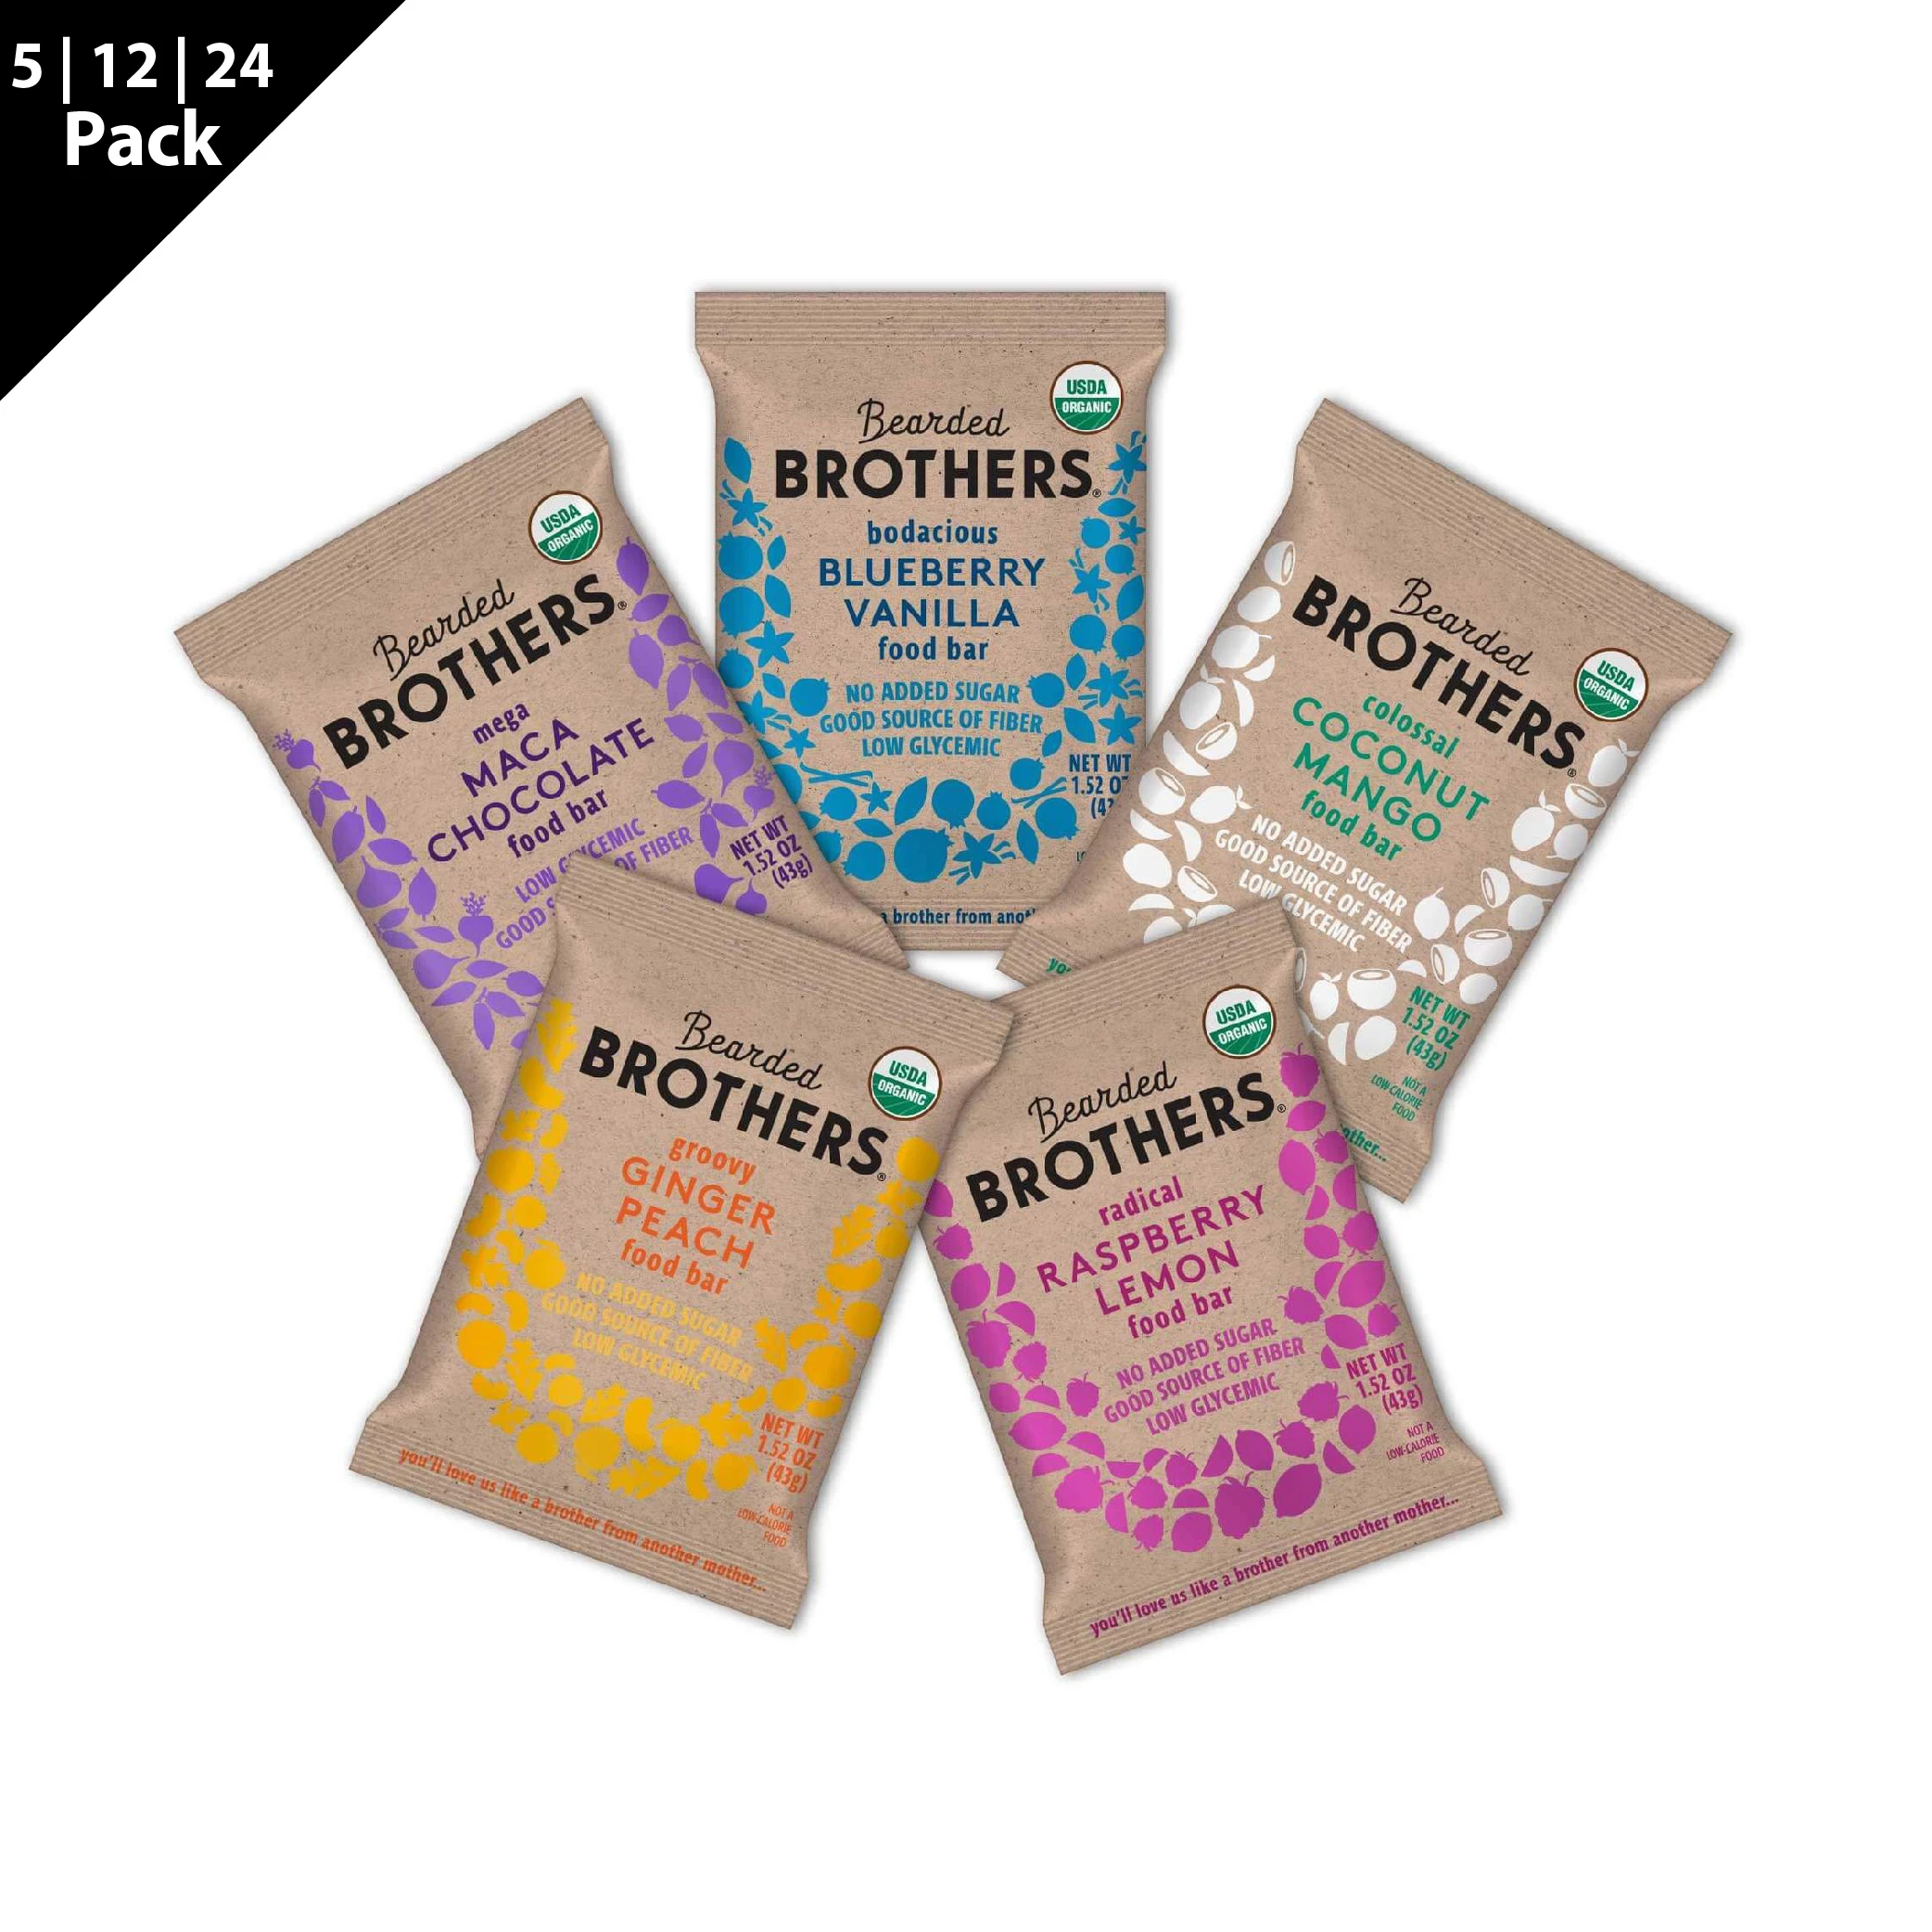 Bearded Brothers snack bar assortment